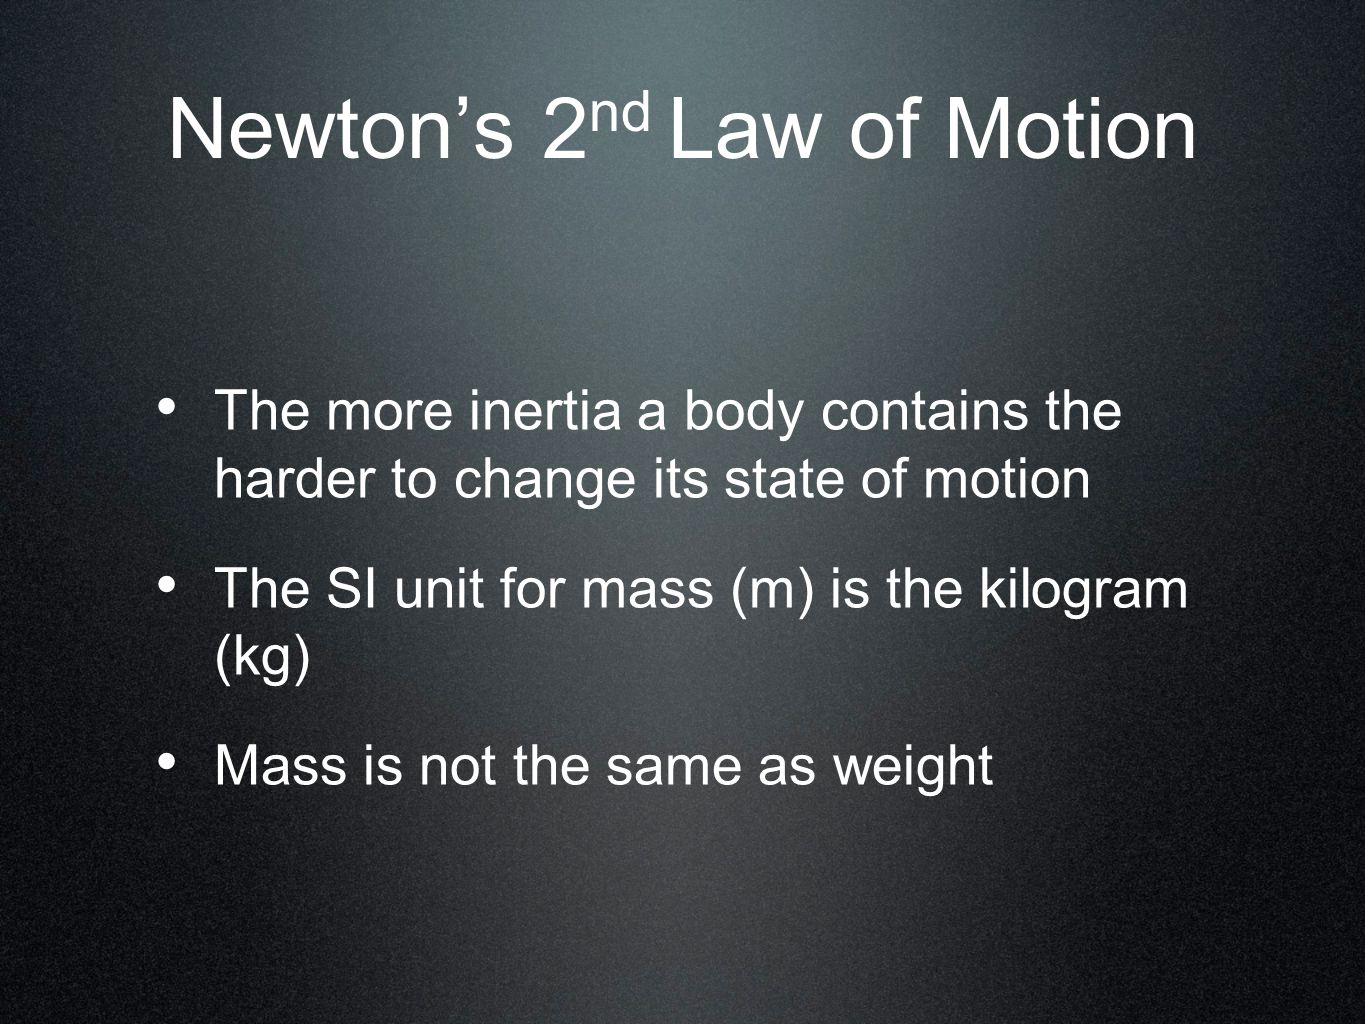 Newton’s 2 nd Law of Motion The more inertia a body contains the harder to change its state of motion The SI unit for mass (m) is the kilogram (kg) Mass is not the same as weight